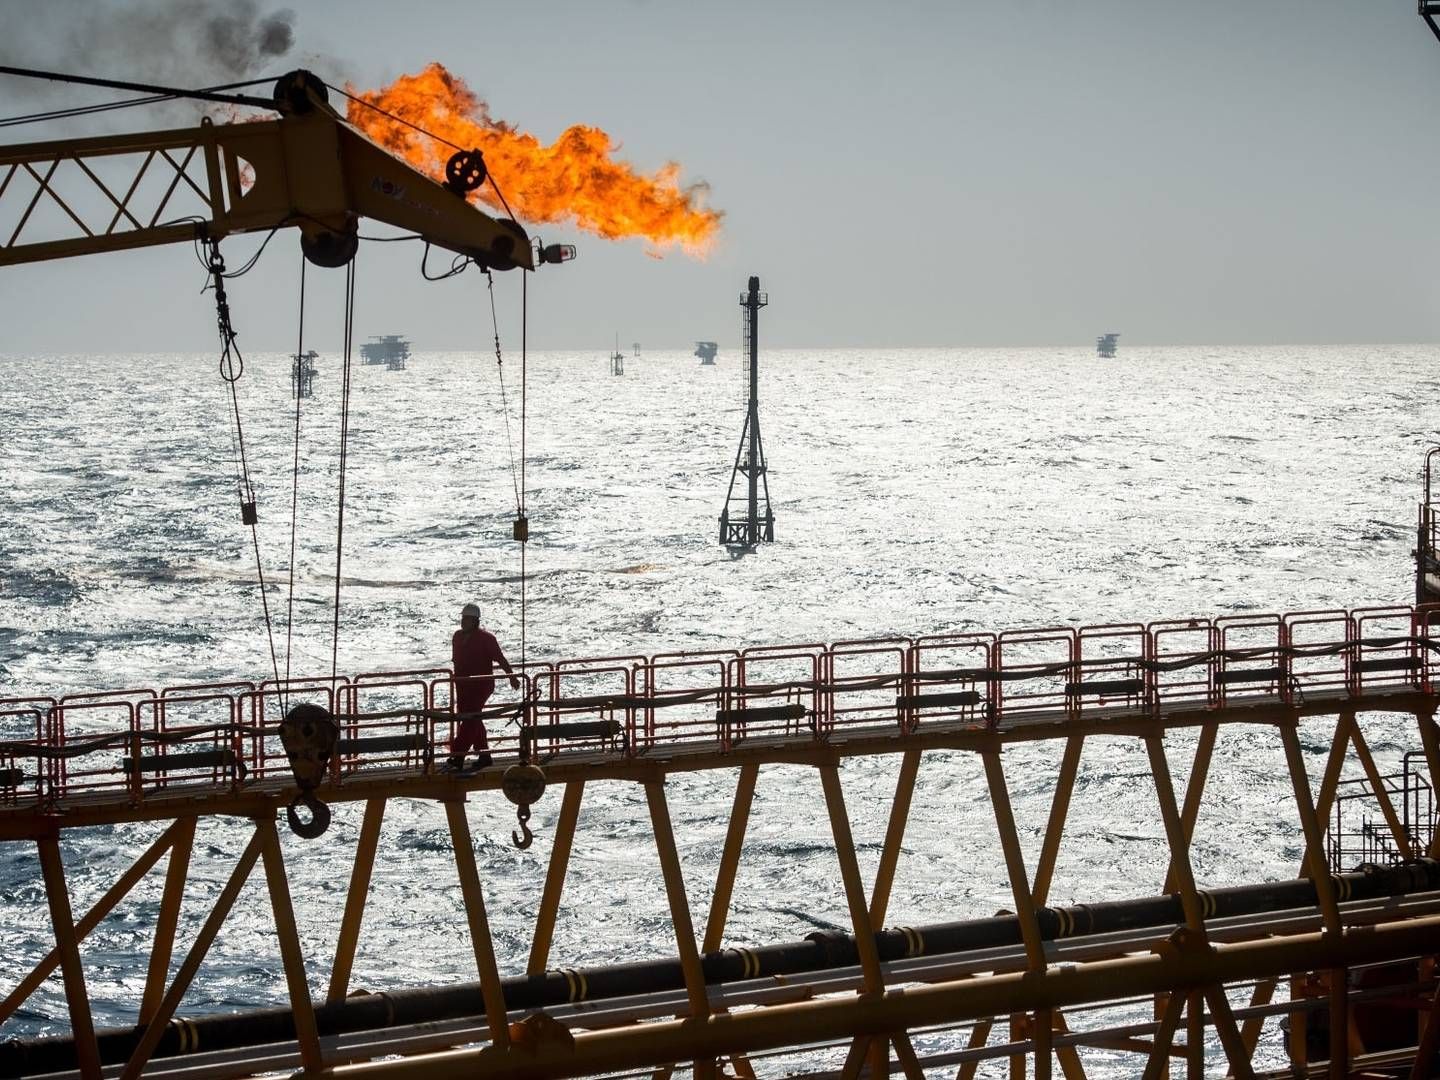 OPEC members consider suspending Russia from oil deal. | Photo: Bloomberg/Bloomberg